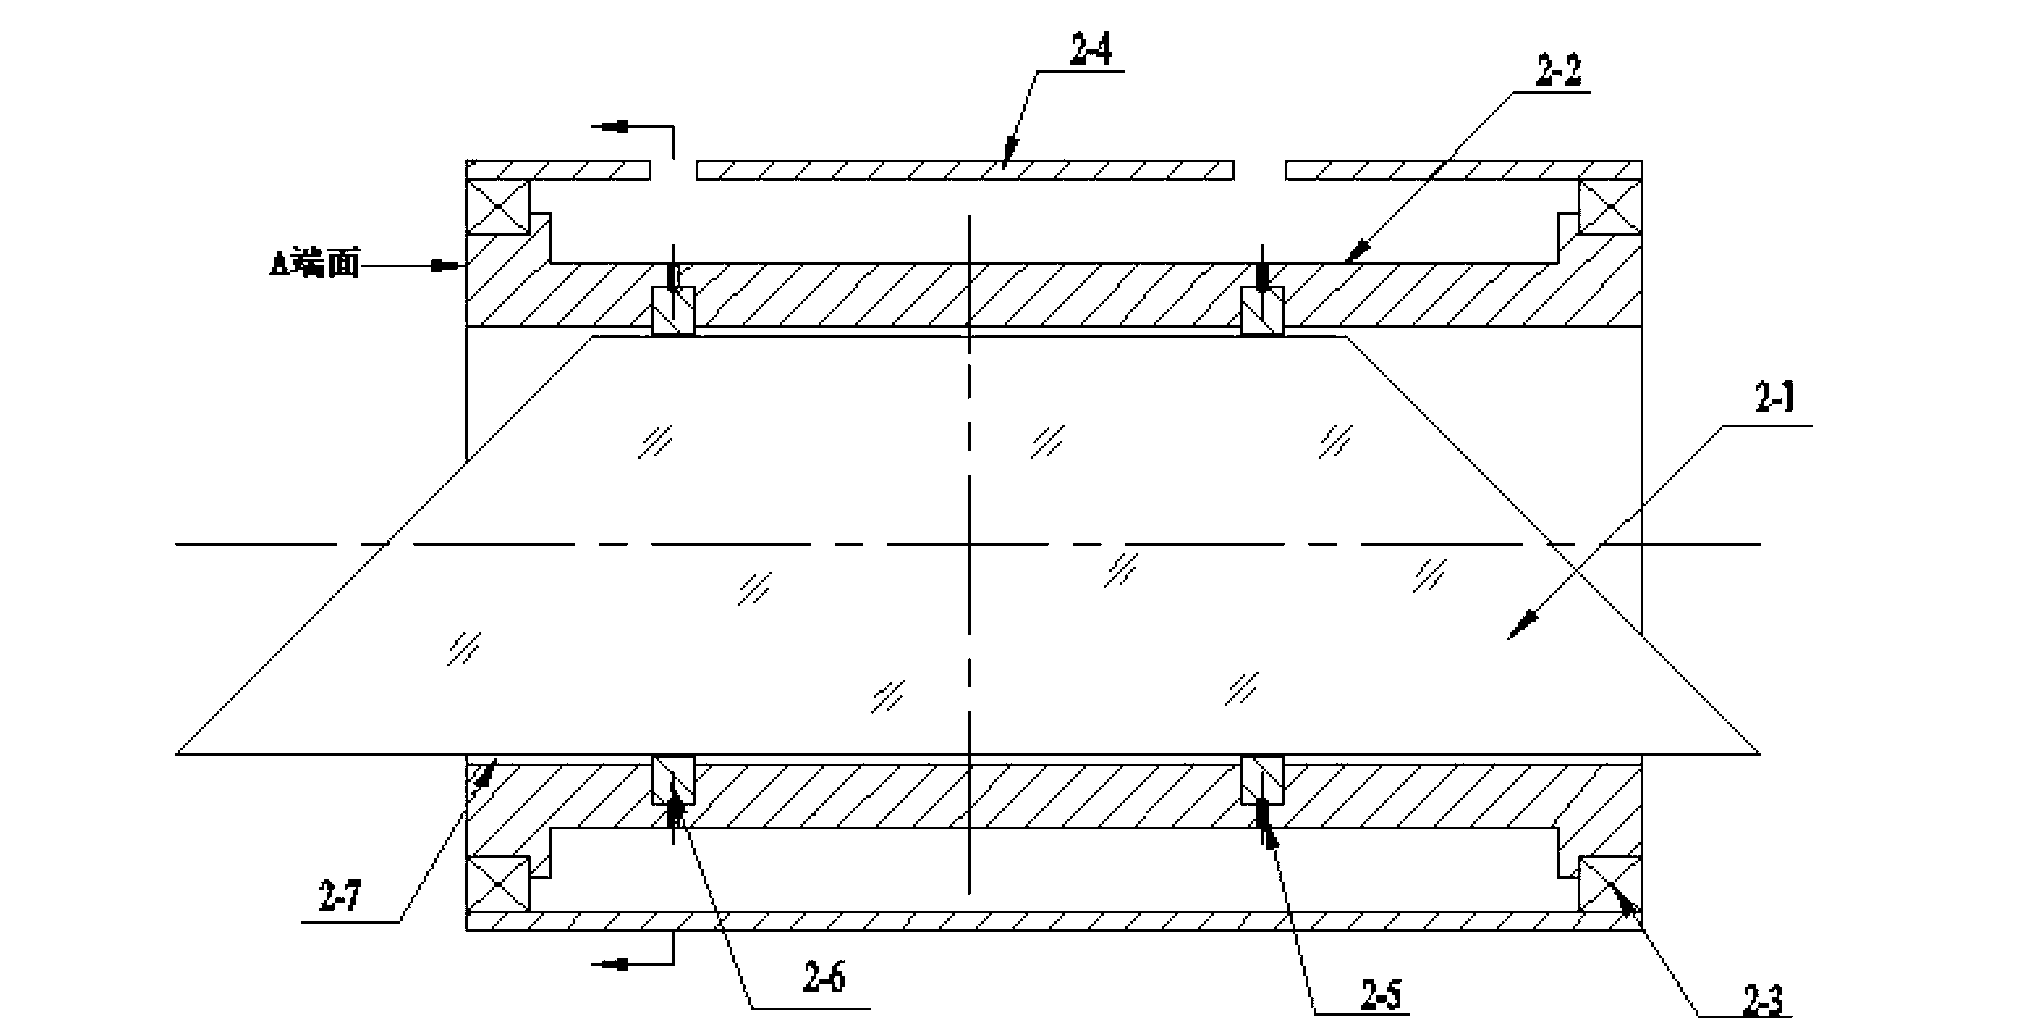 Method for adjusting parallelism of axis of reflector and mechanical rotating shaft of Dove prism